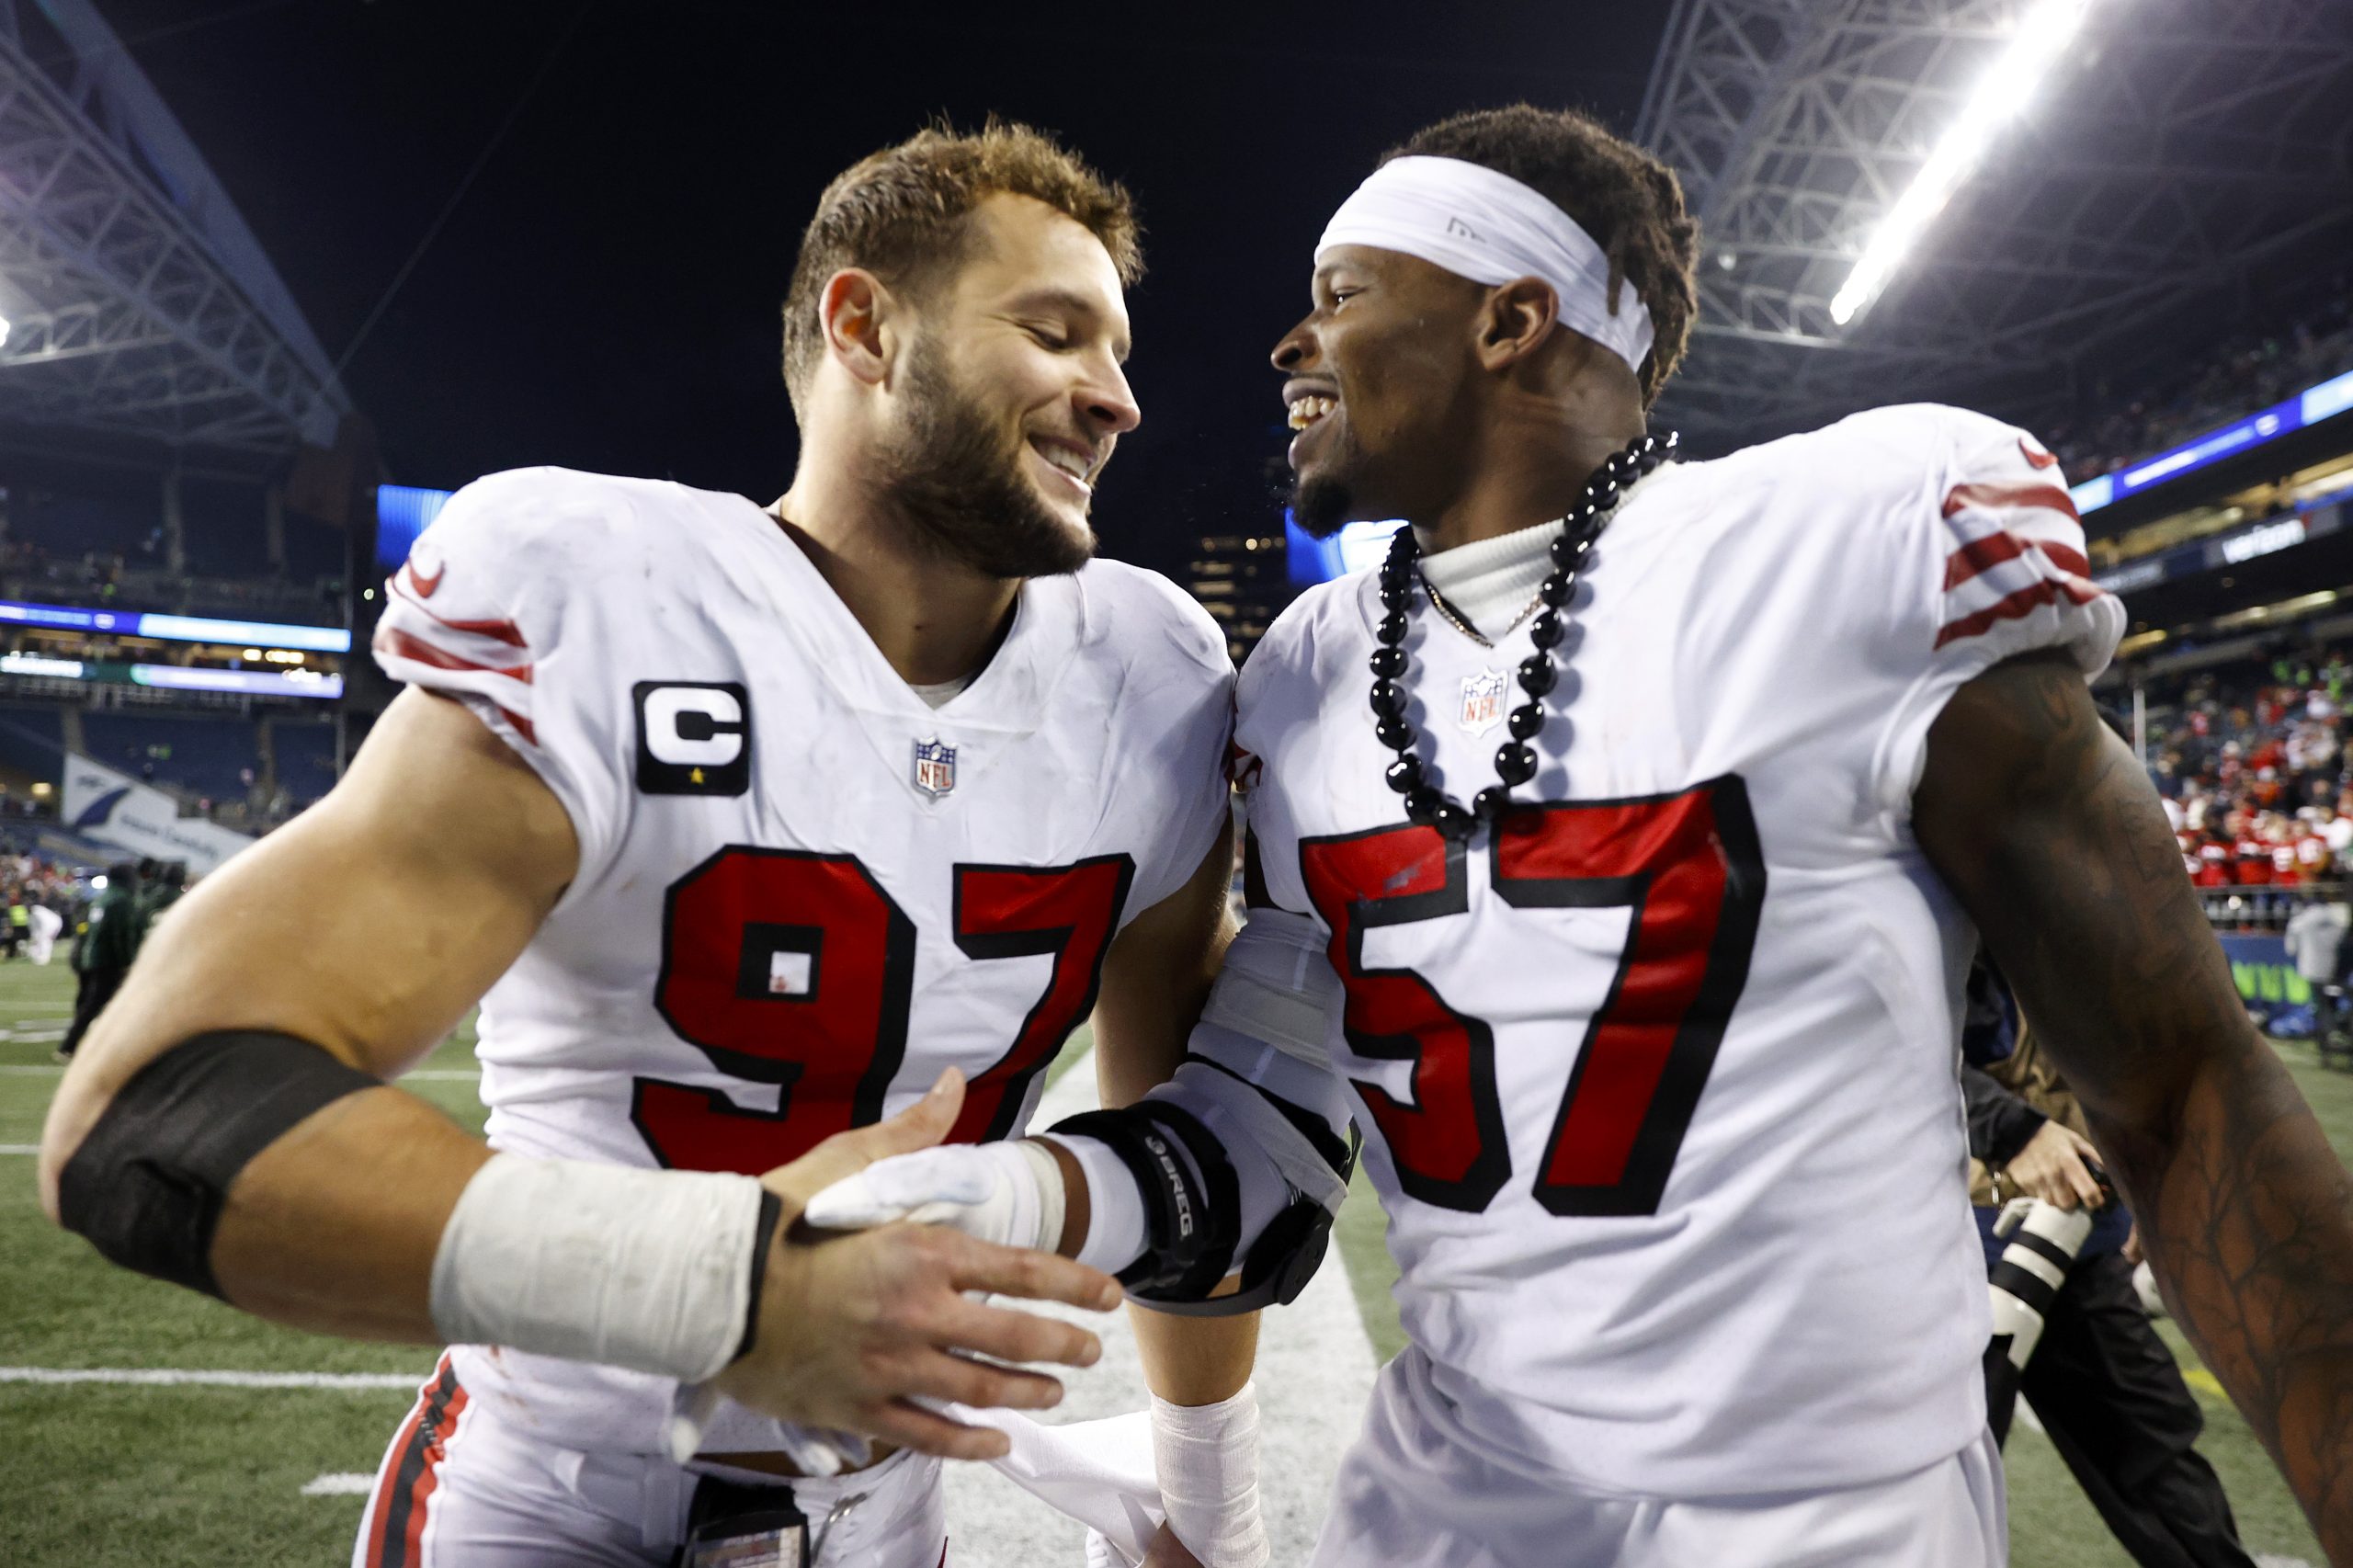 Nick Bosa #97 and Dre Greenlaw #57 of the San Francisco 49ers celebrate after defeating the Seattle...